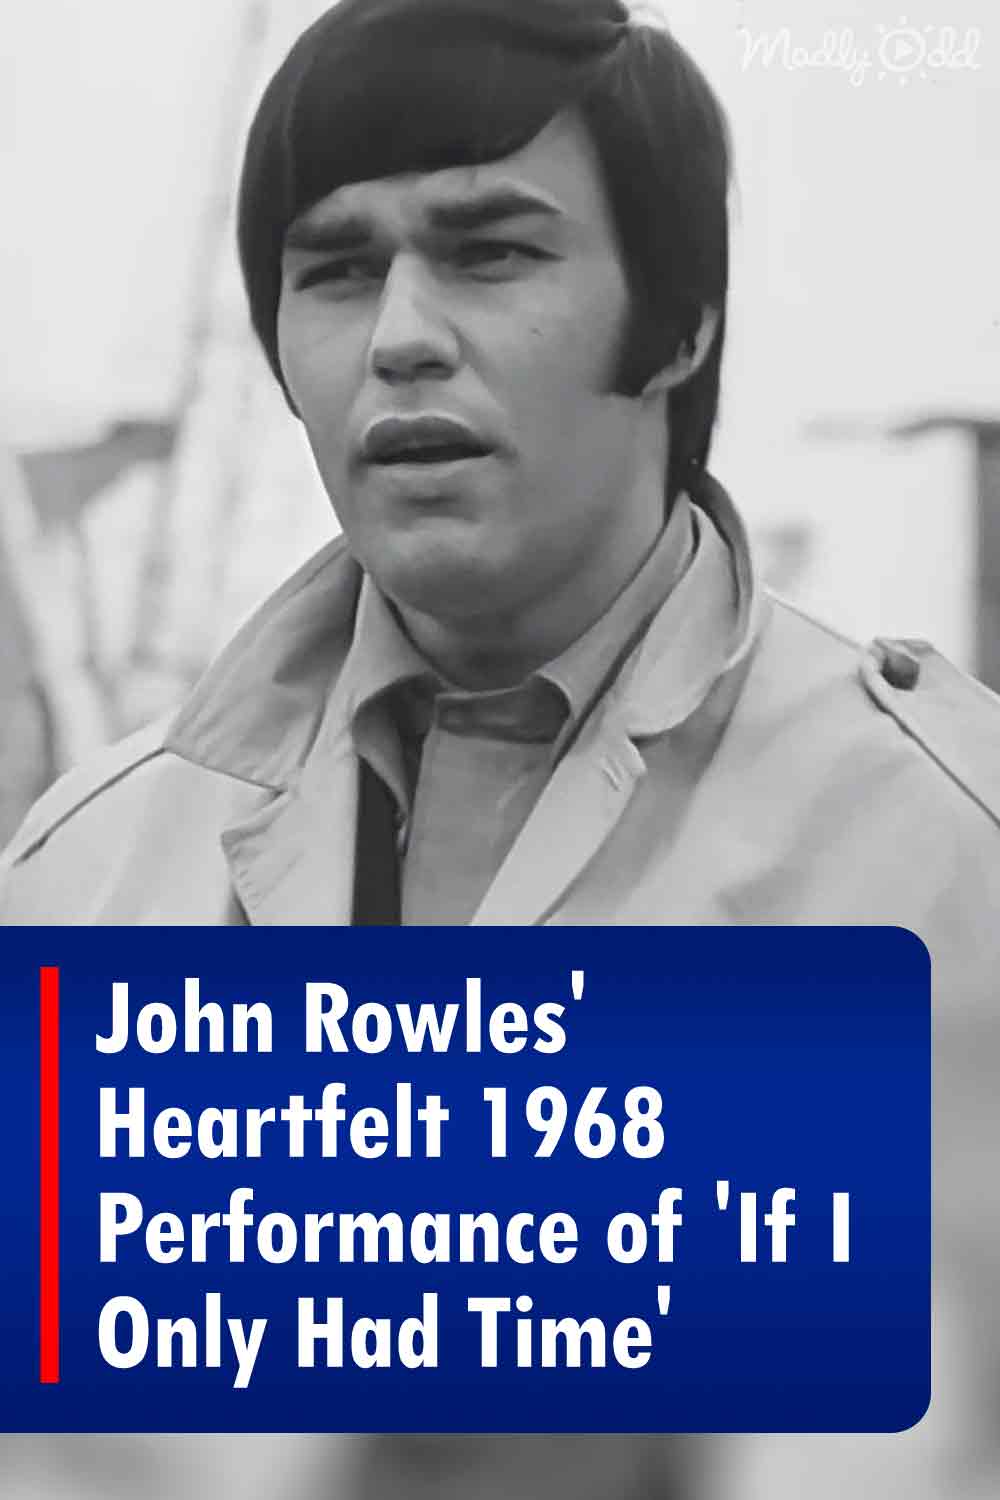 John Rowles\' Heartfelt 1968 Performance of \'If I Only Had Time\'